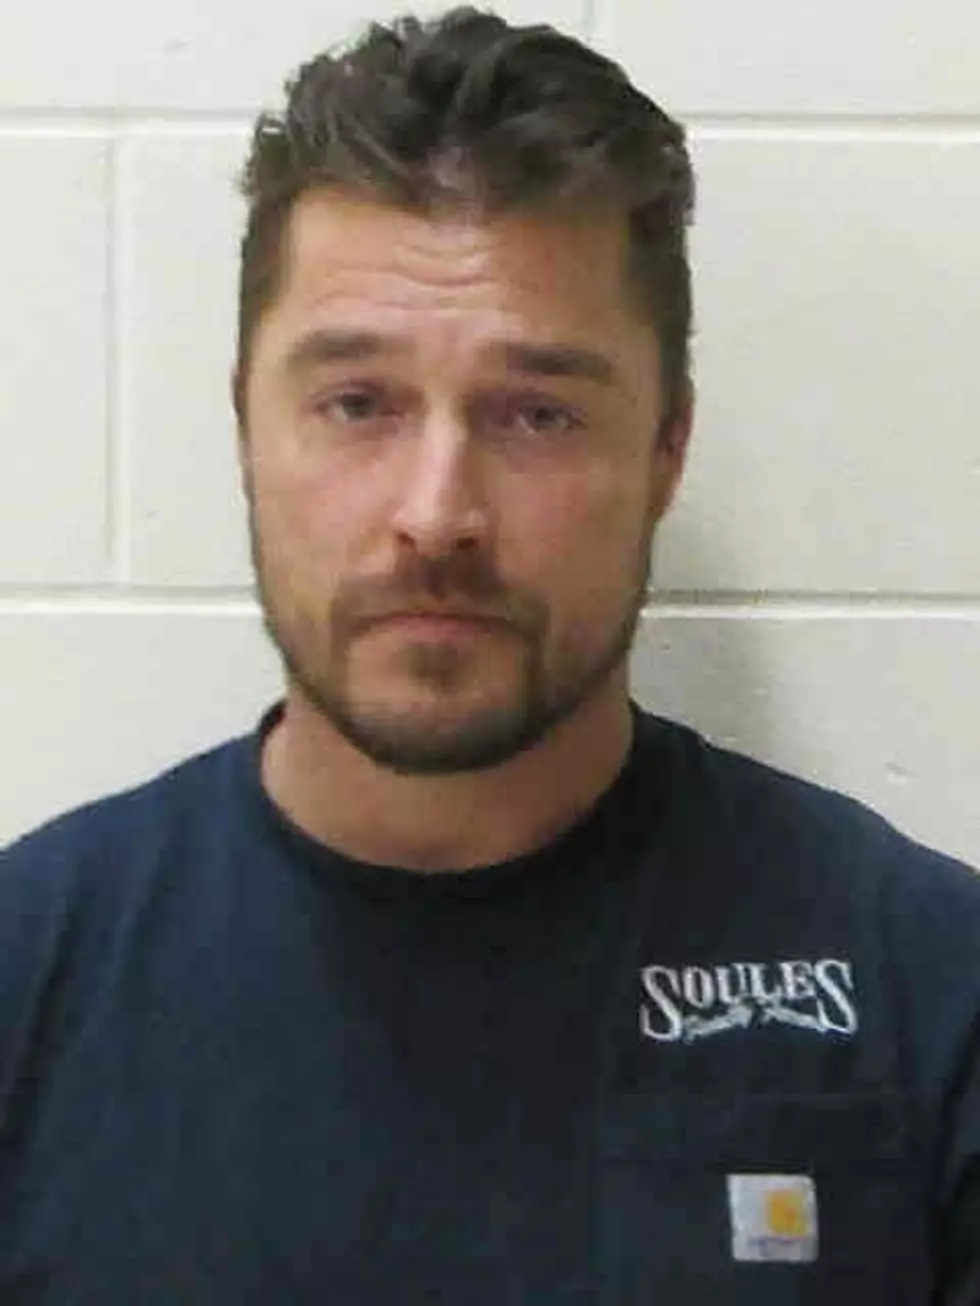 UPDATE: Judge Rules Against Defense In Chris Soules Case